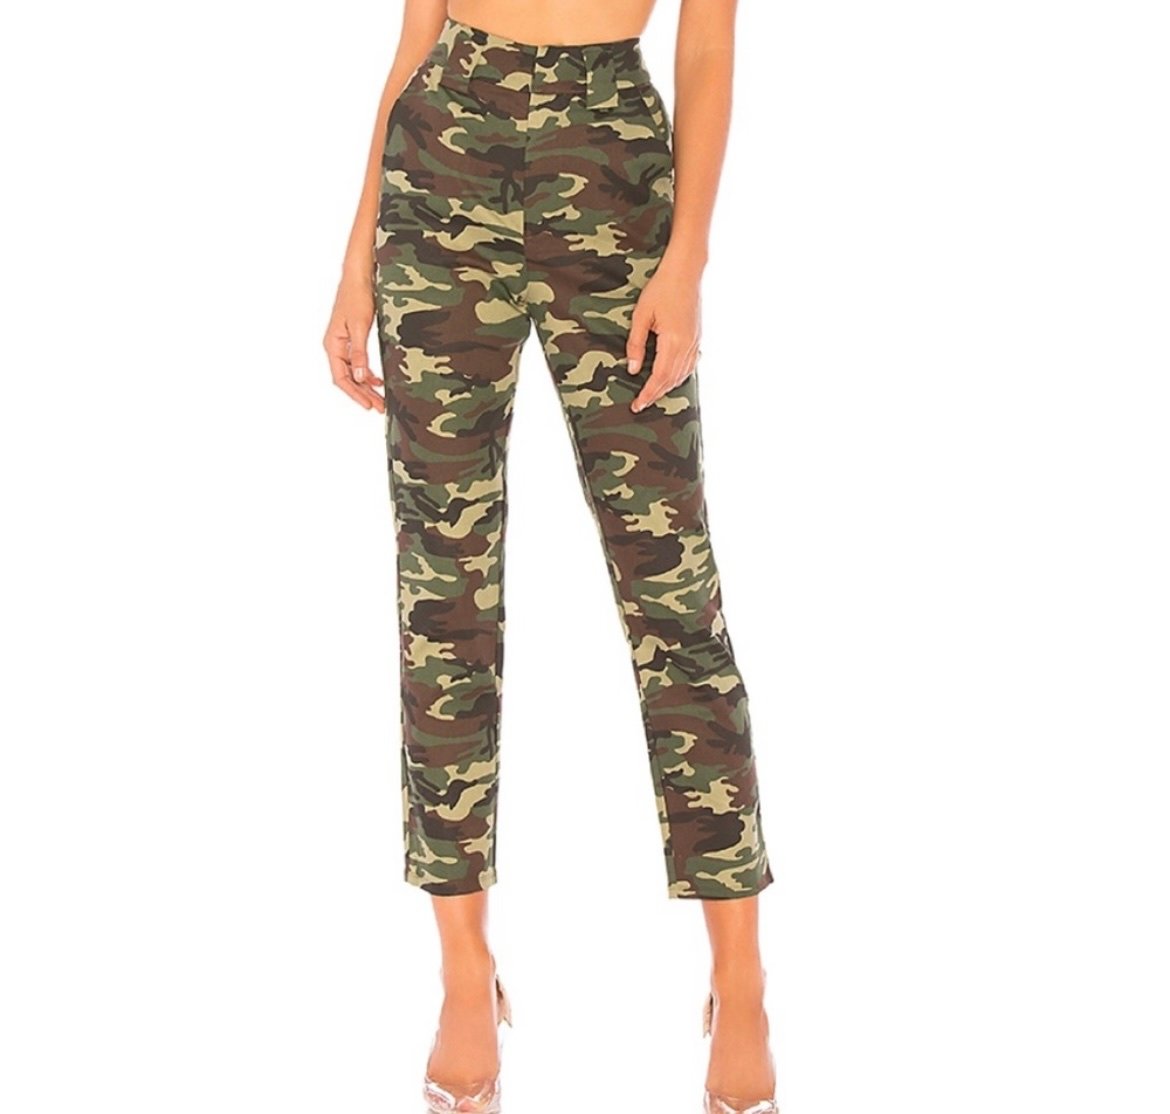 Special offer  Lovers + Friends Camouflage City Pants High Waisted Size XS Streetwear Womens JGqrG6DQz New Style